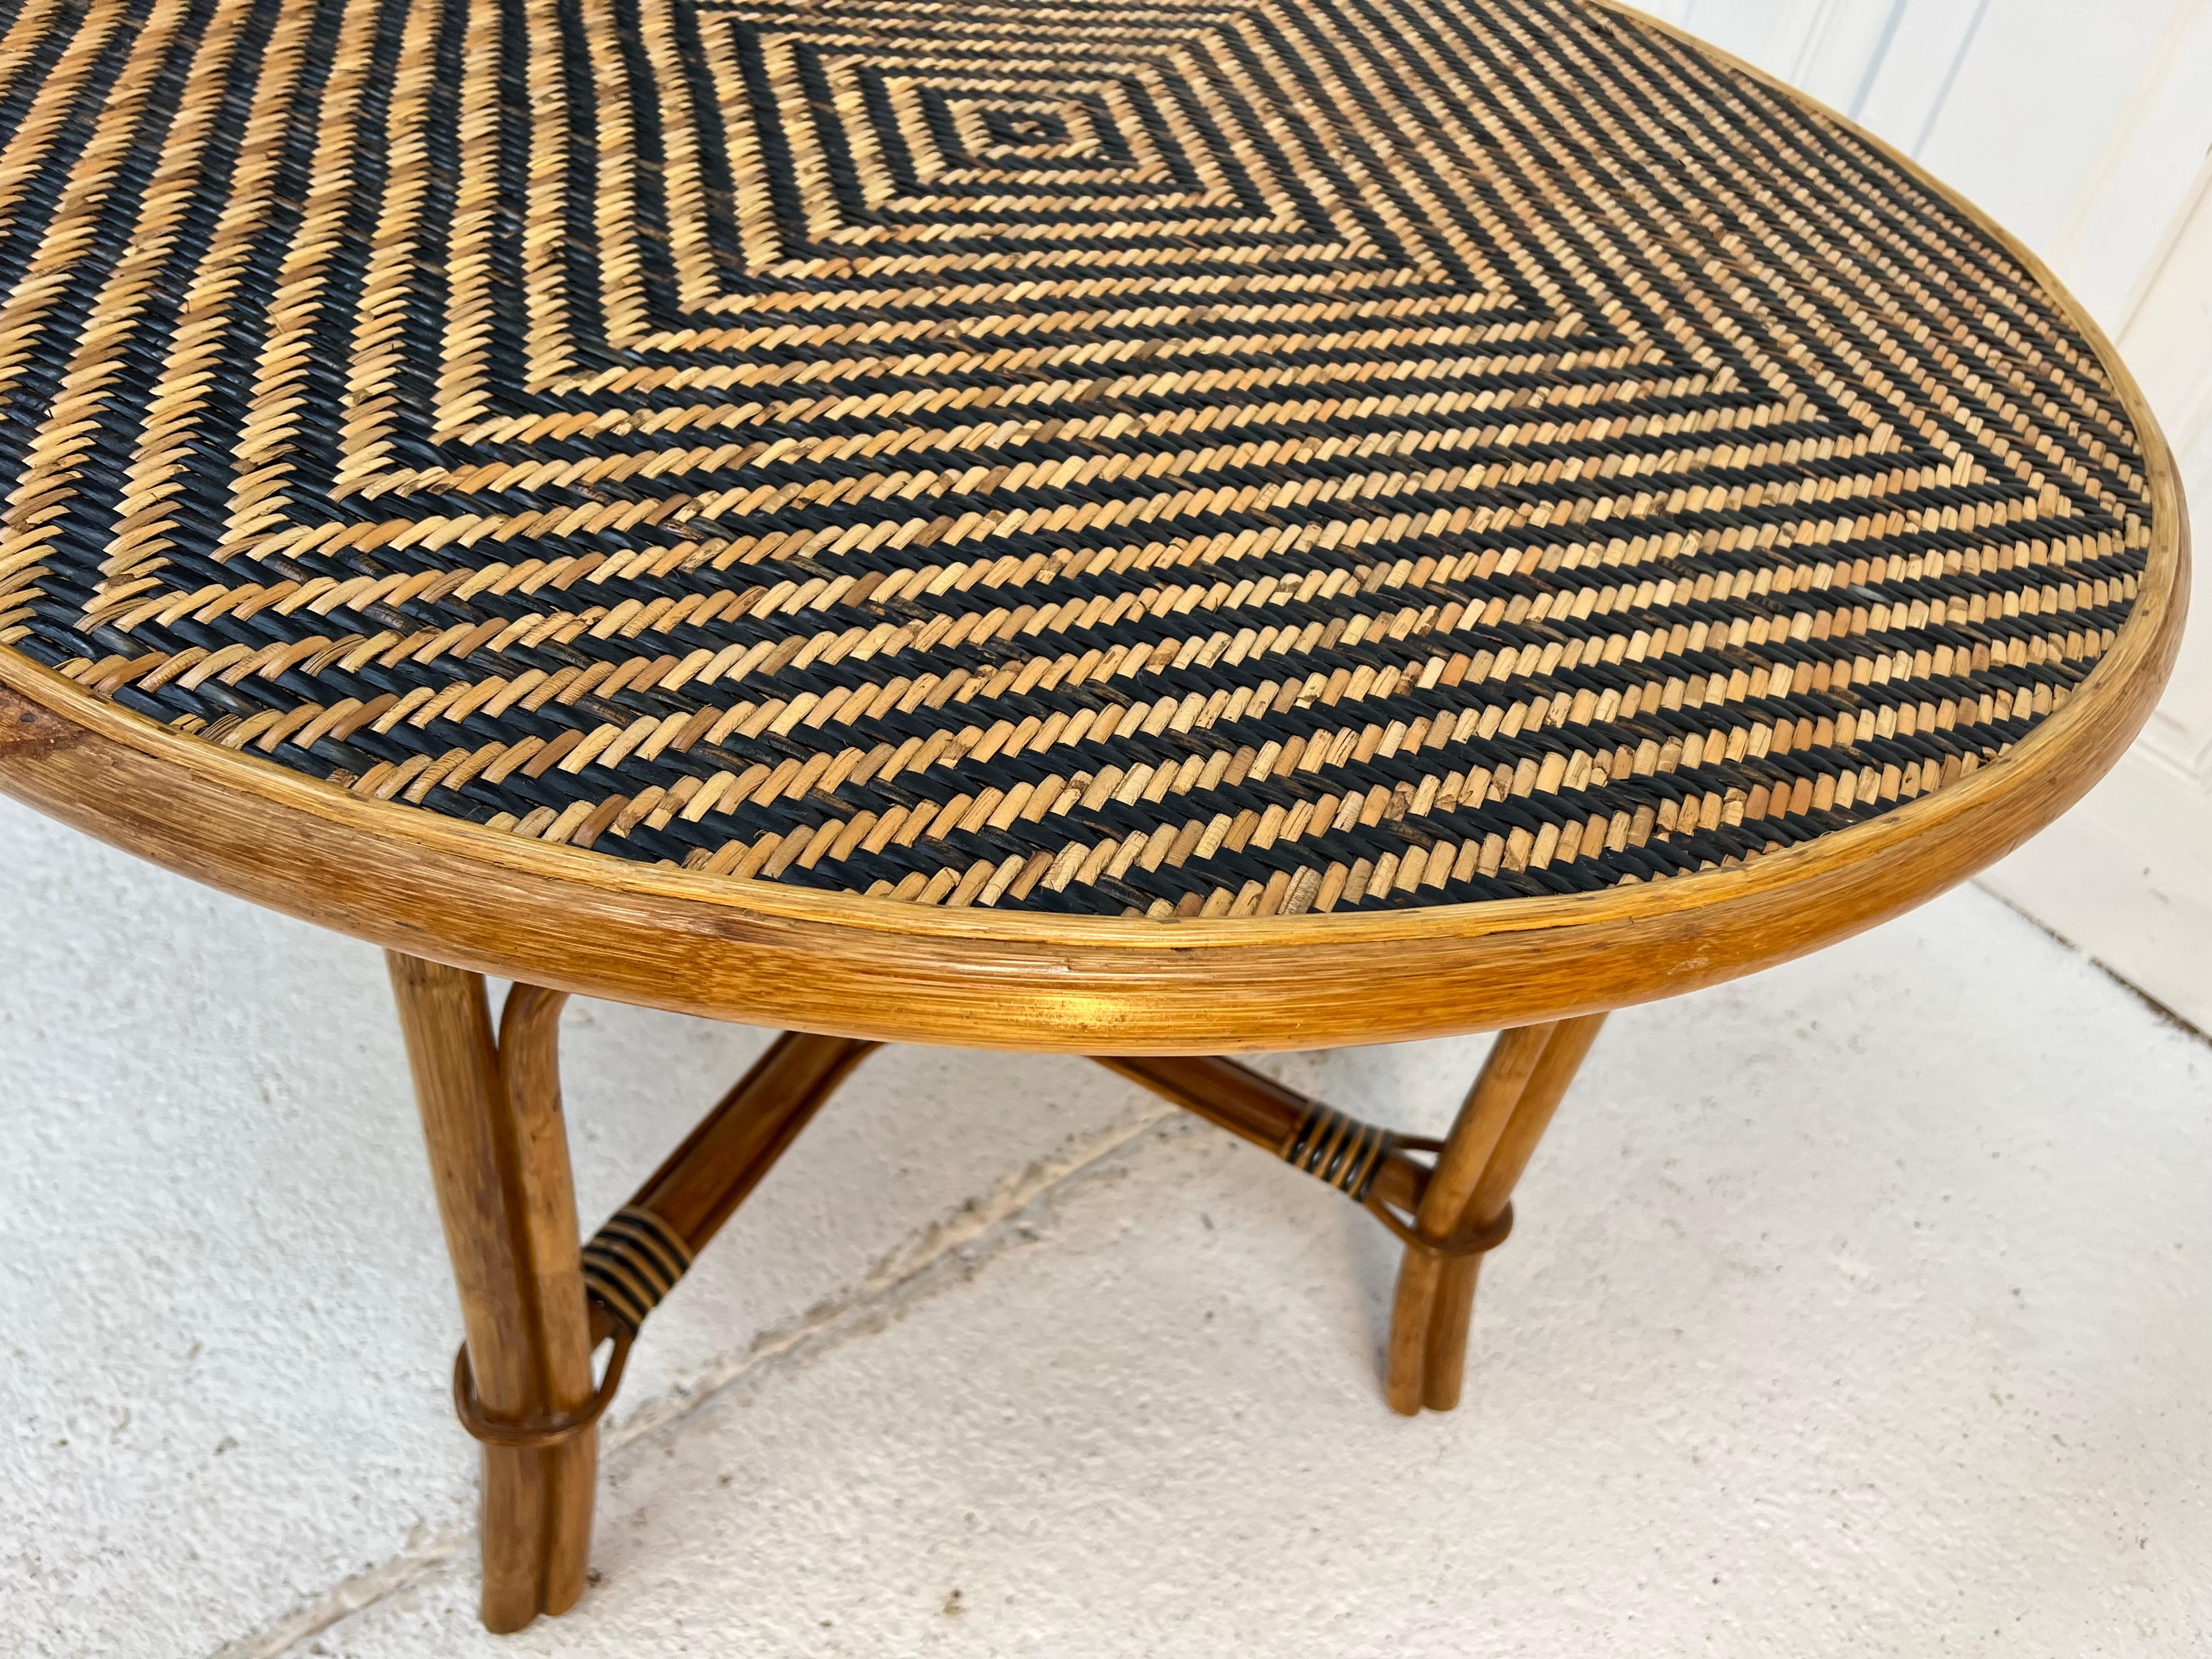 20th Century Two Tone Wicker Table 1950s Vintage For Sale